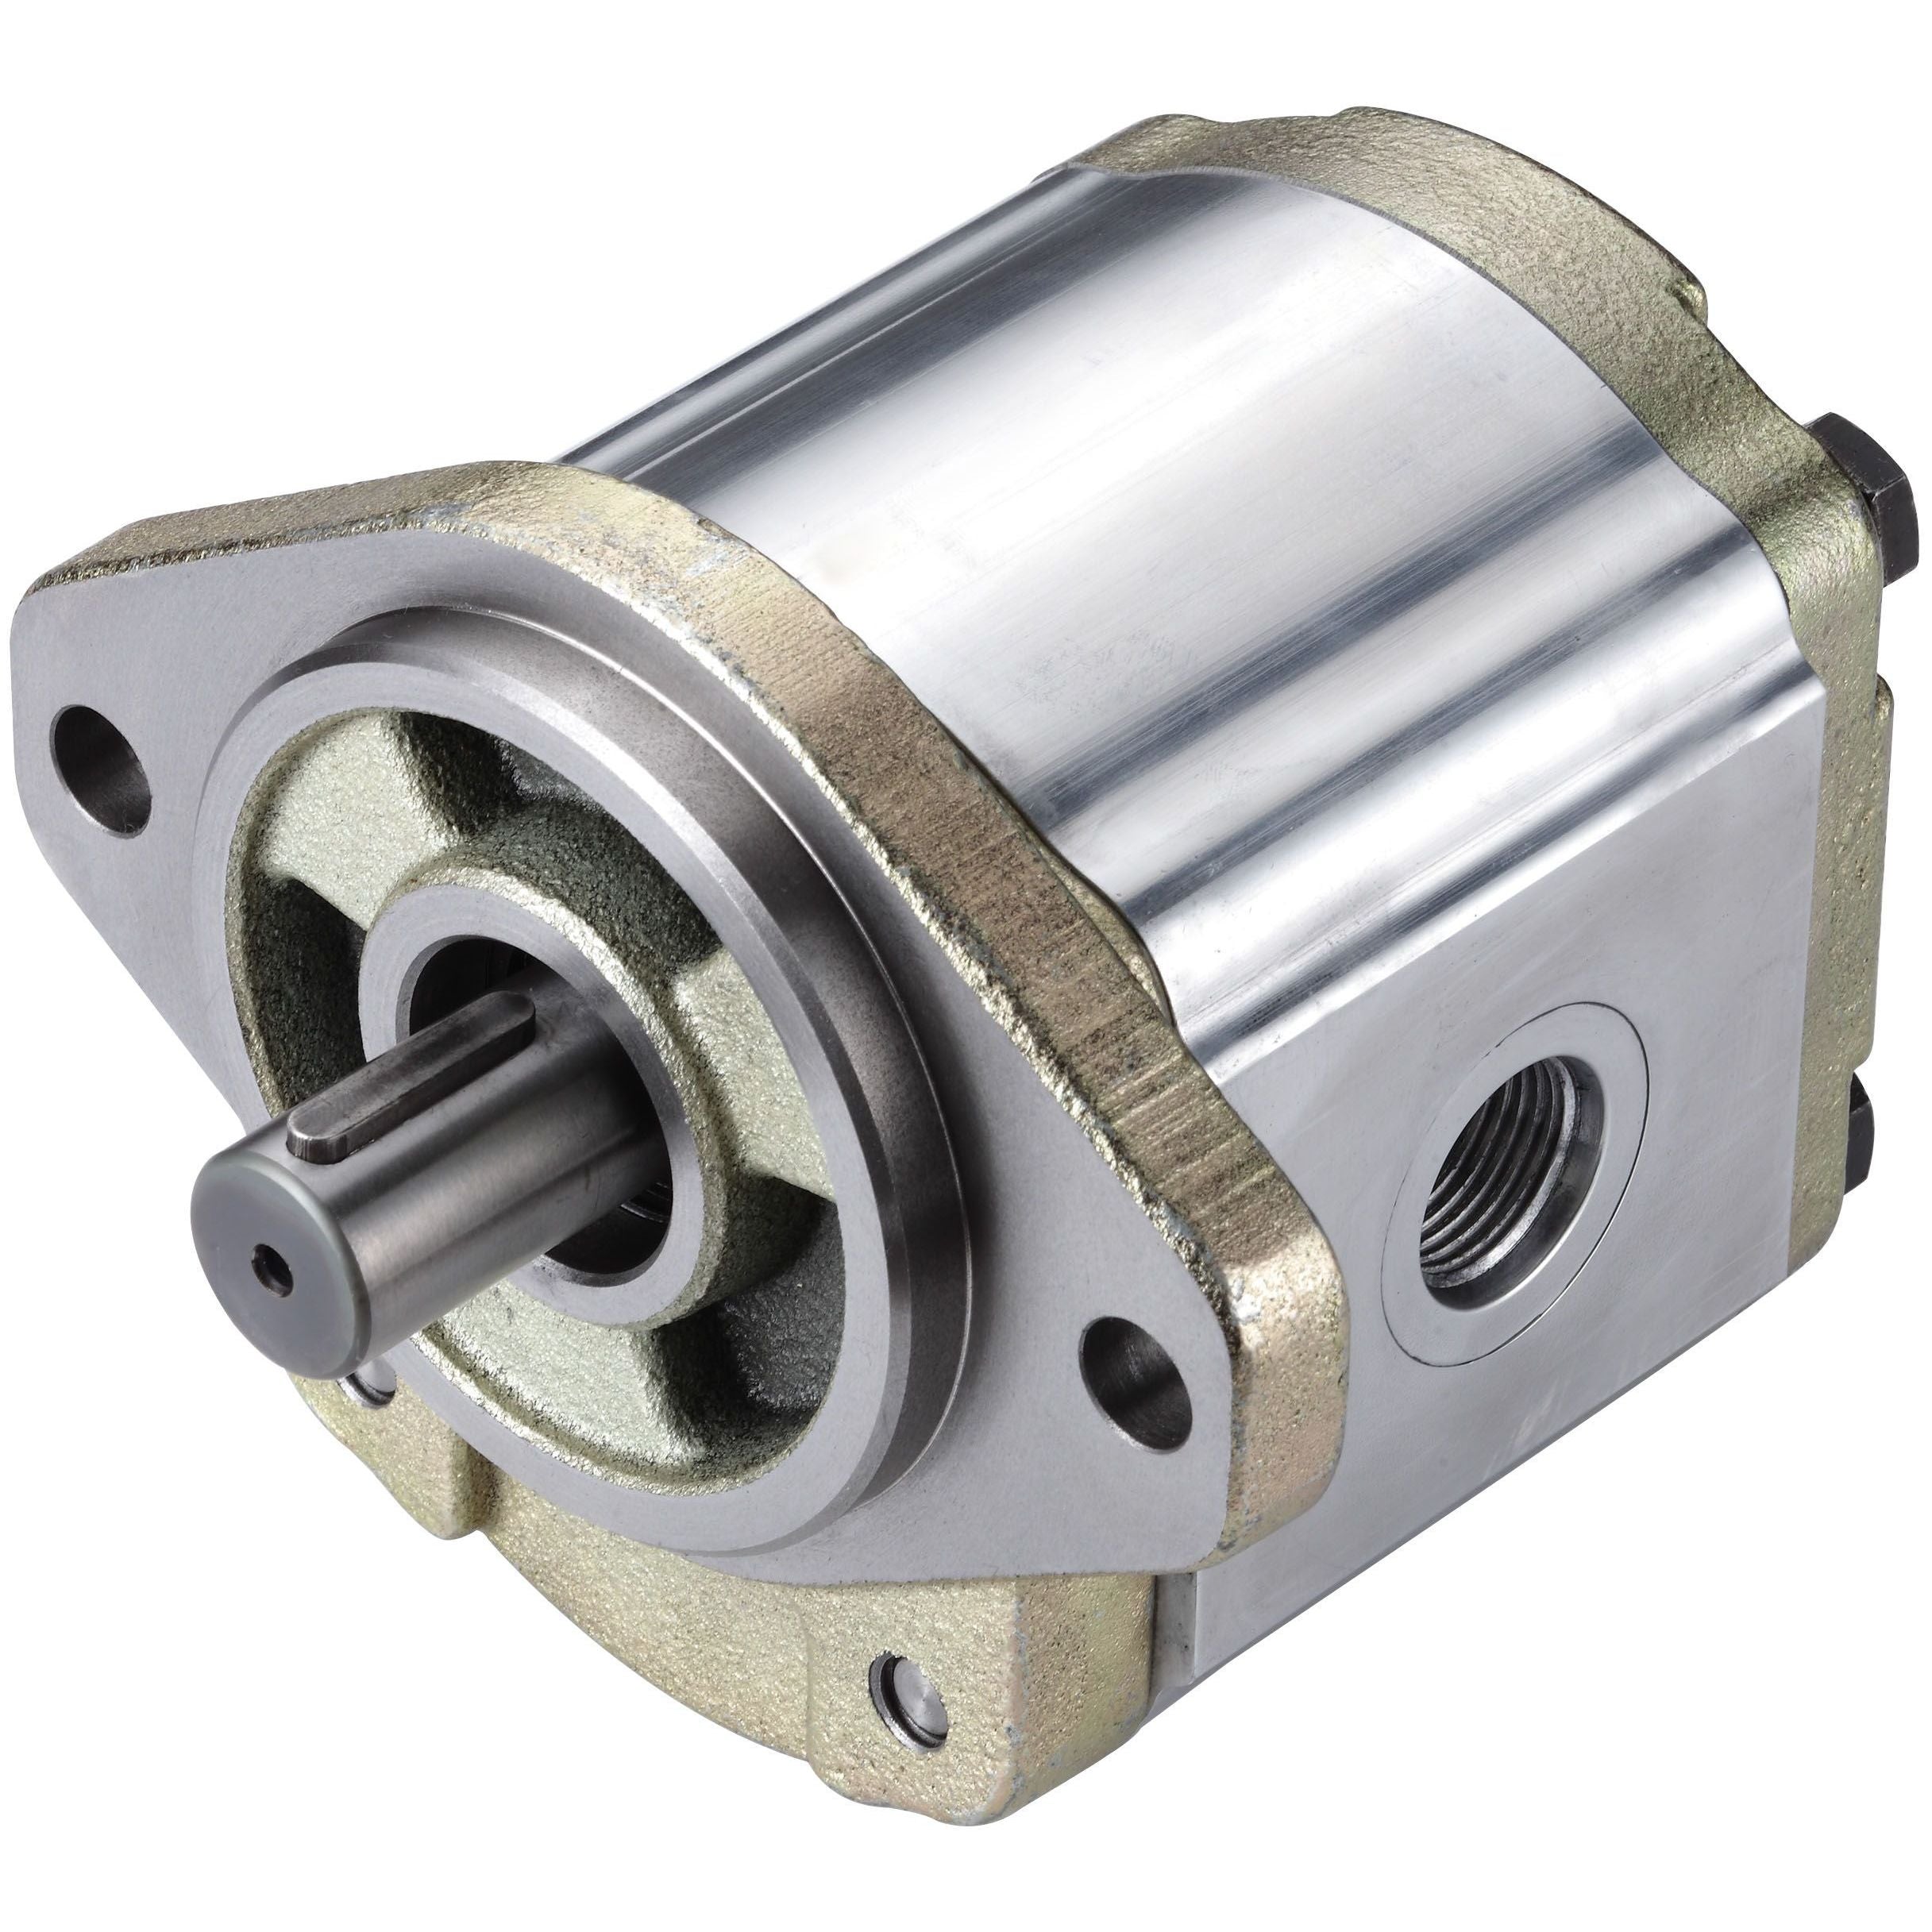 3GB8U144L : Honor Gear Pump, CCW Rotation, 44cc (2.69in3), 20.92 GPM, 3100psi, 2500 RPM, #16 SAE (1") In, #16 SAE (1") Out, Splined Shaft 13-Tooth, 16/32 Pitch, SAE B 2-Bolt Mount